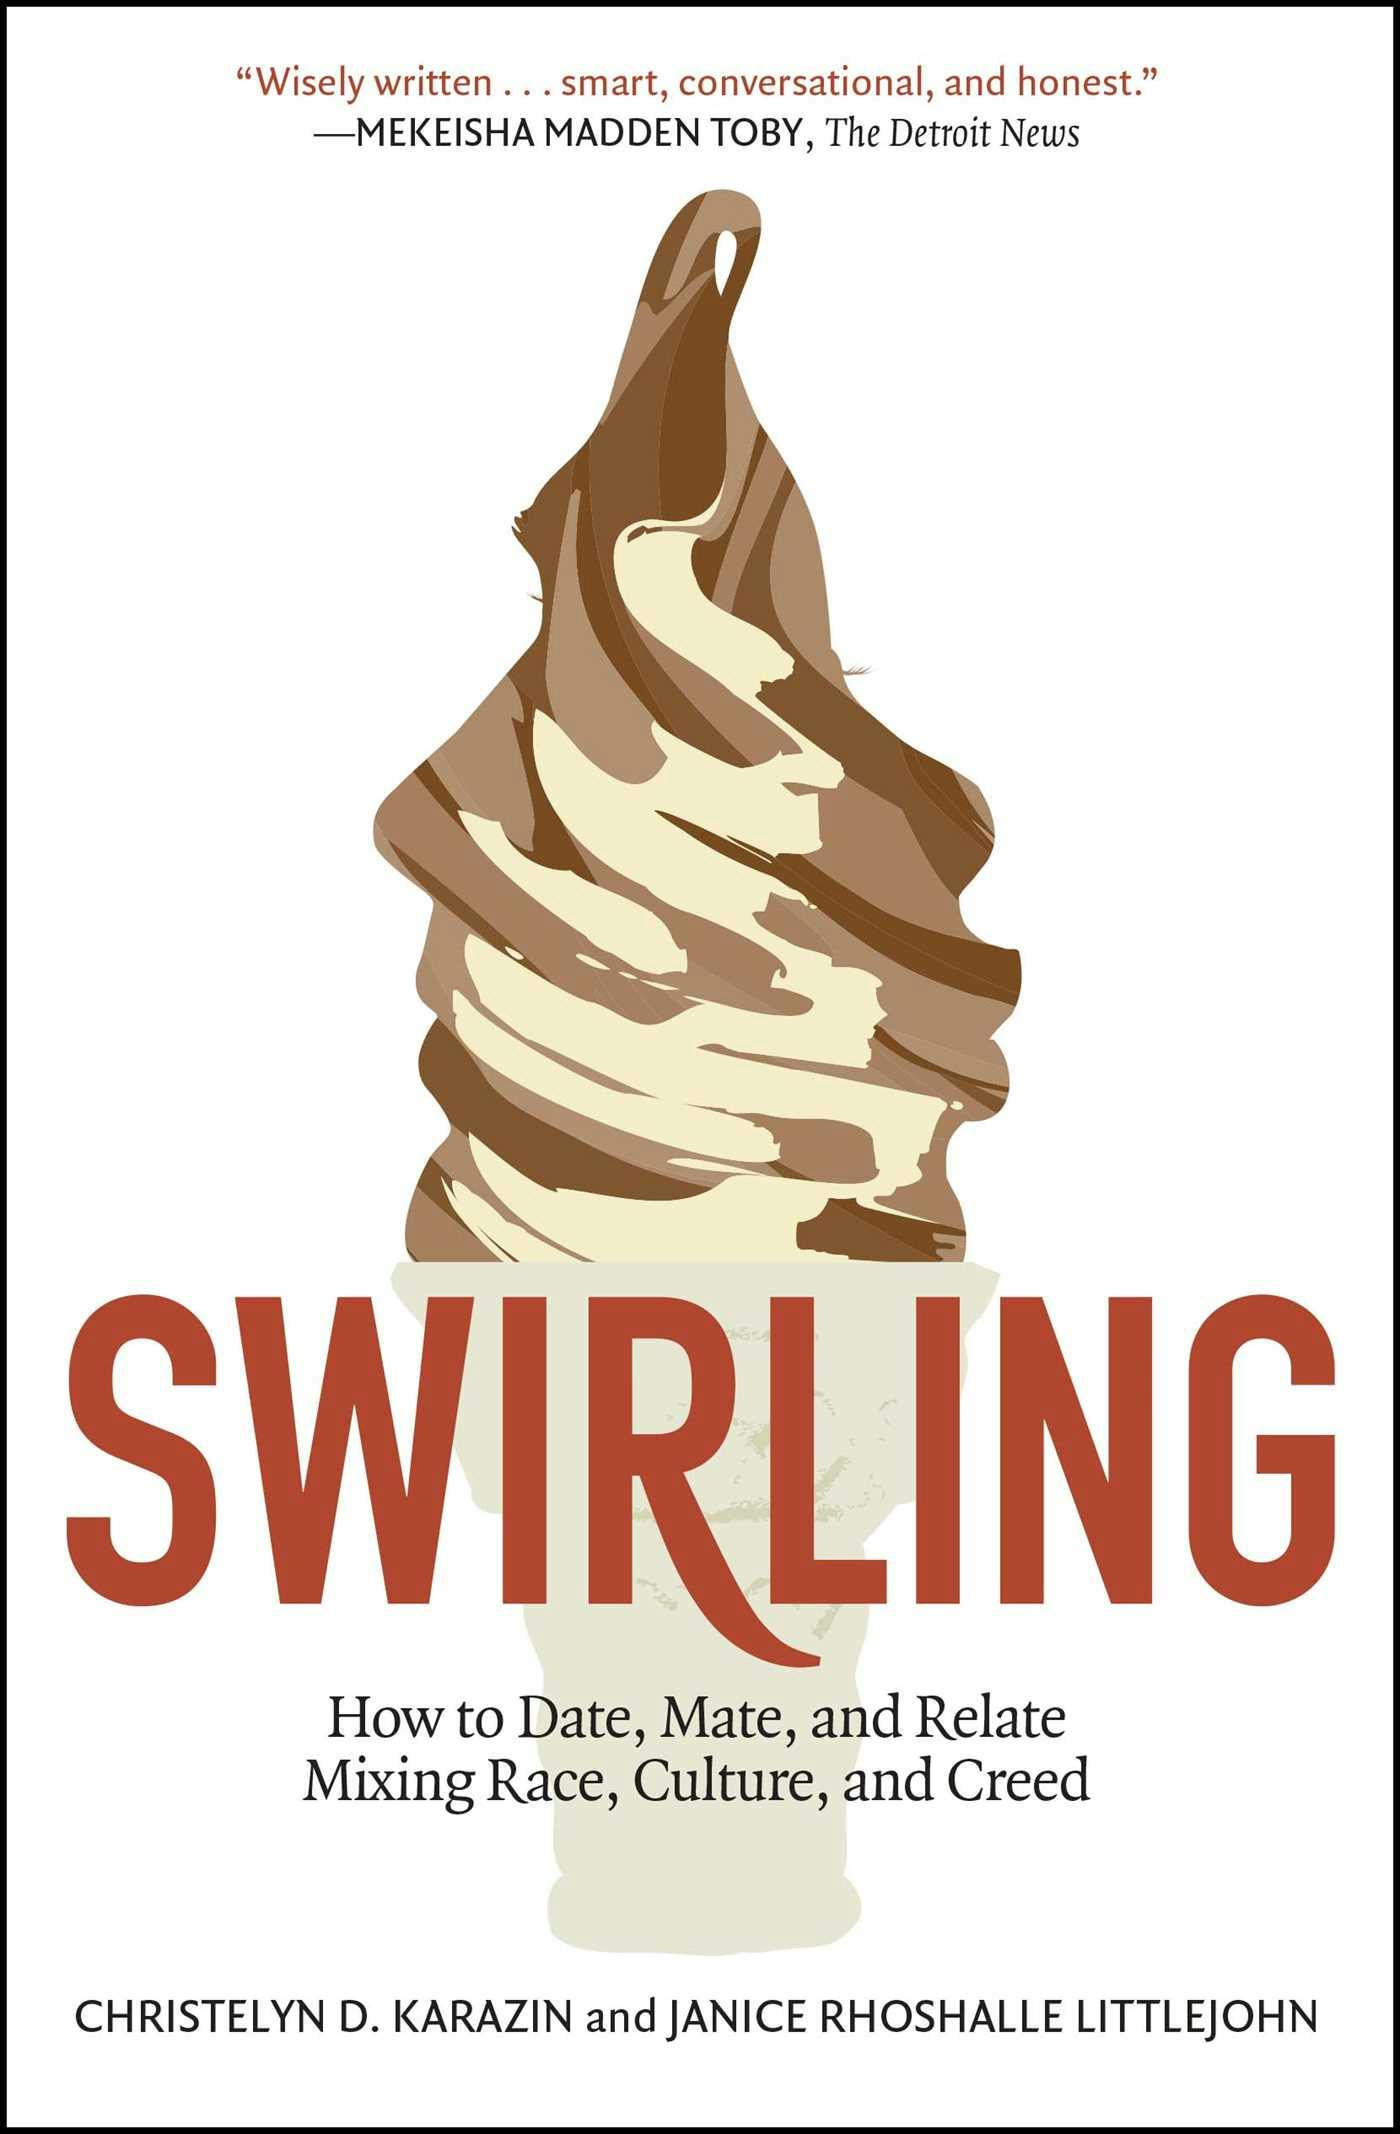 Swirling: How to Date, Mate, and Relate Mixing Race, Culture, and Creed - Janice Rhoshalle Littlejohn, Christelyn D. Karazin